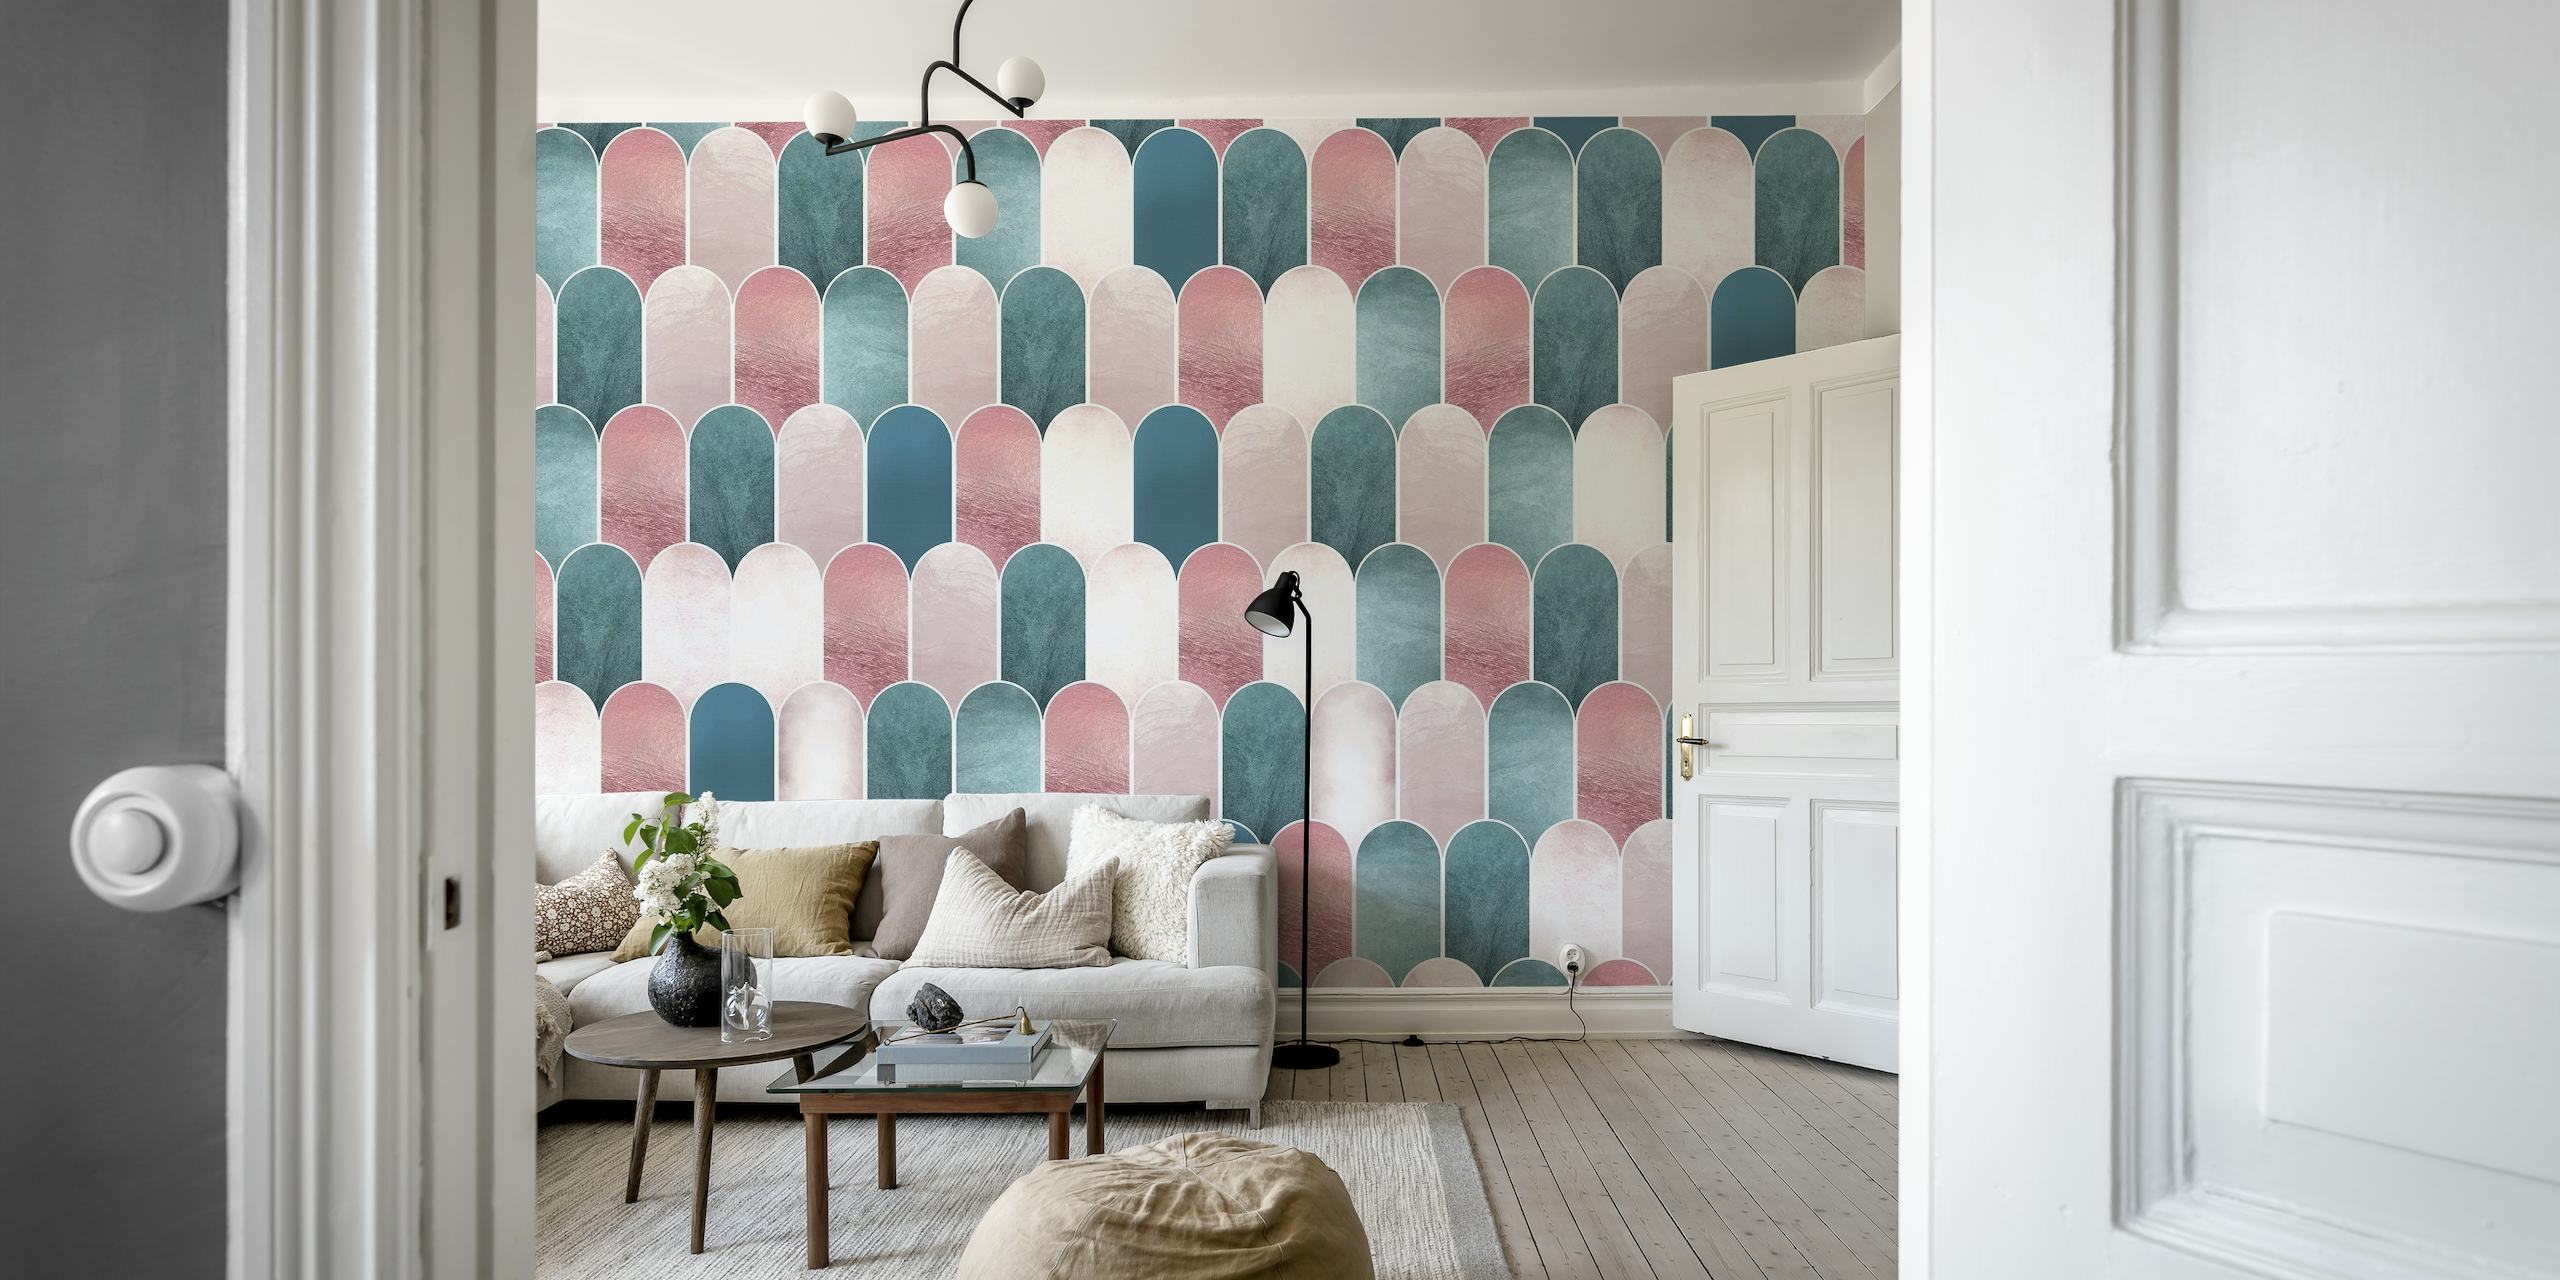 Stylish and calming blush pink and teal wallpaper